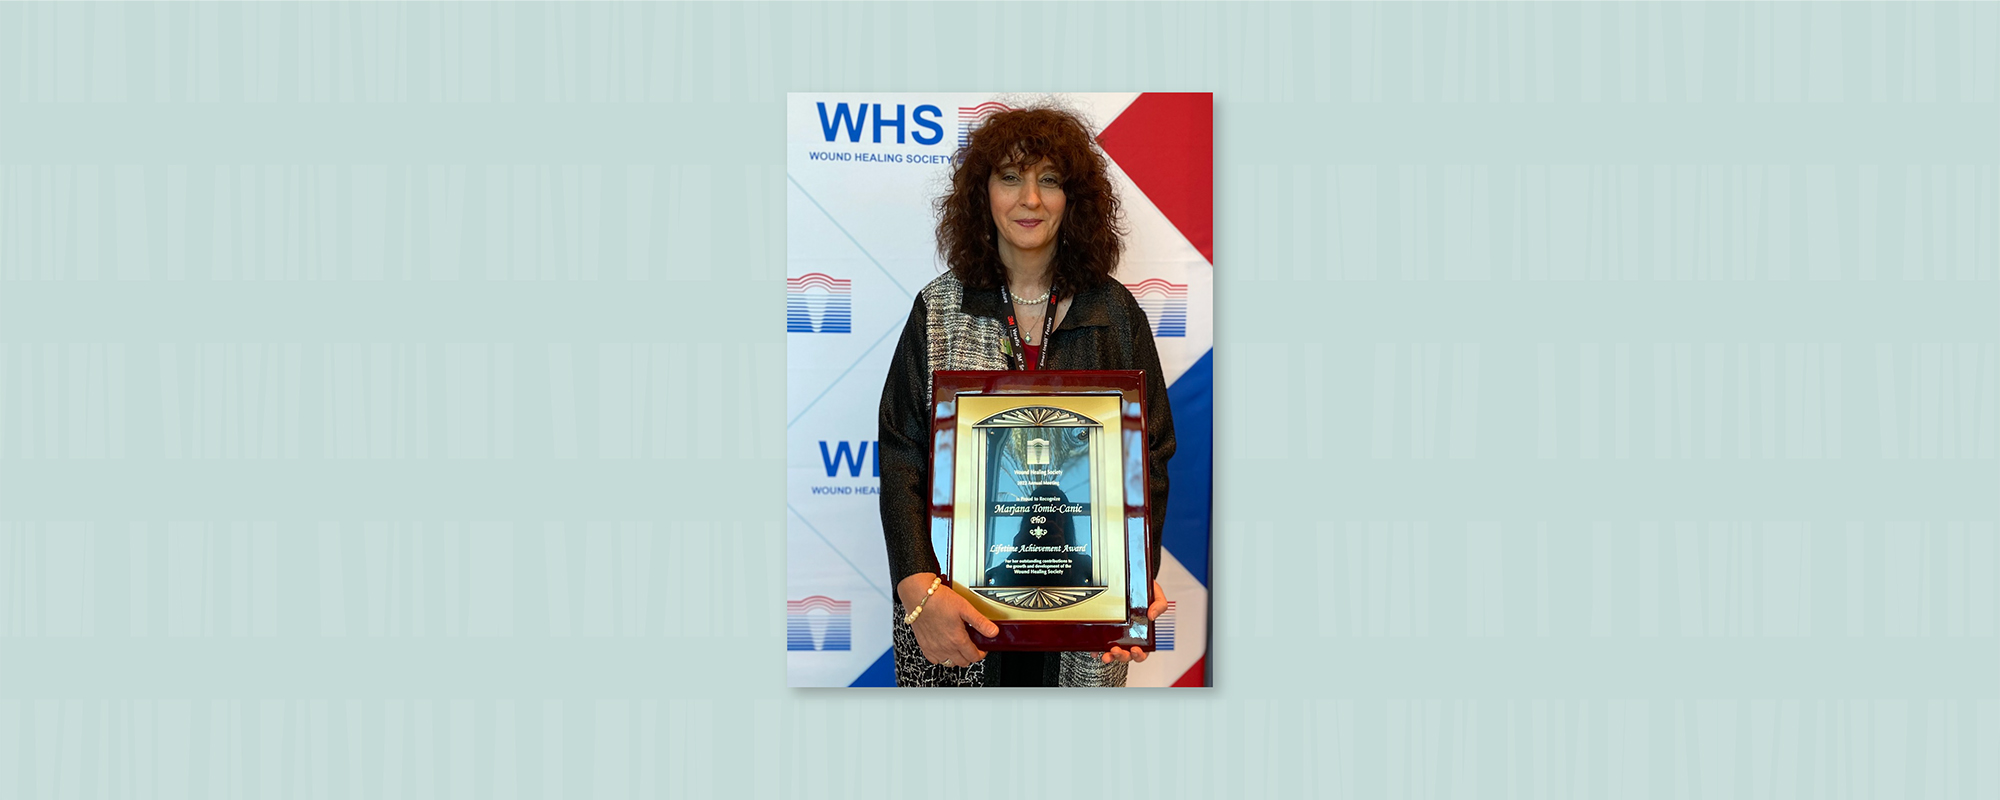 Marjana Tomic-Canic, Ph.D., with the Wound Healing Society Lifetime Achievement Award.